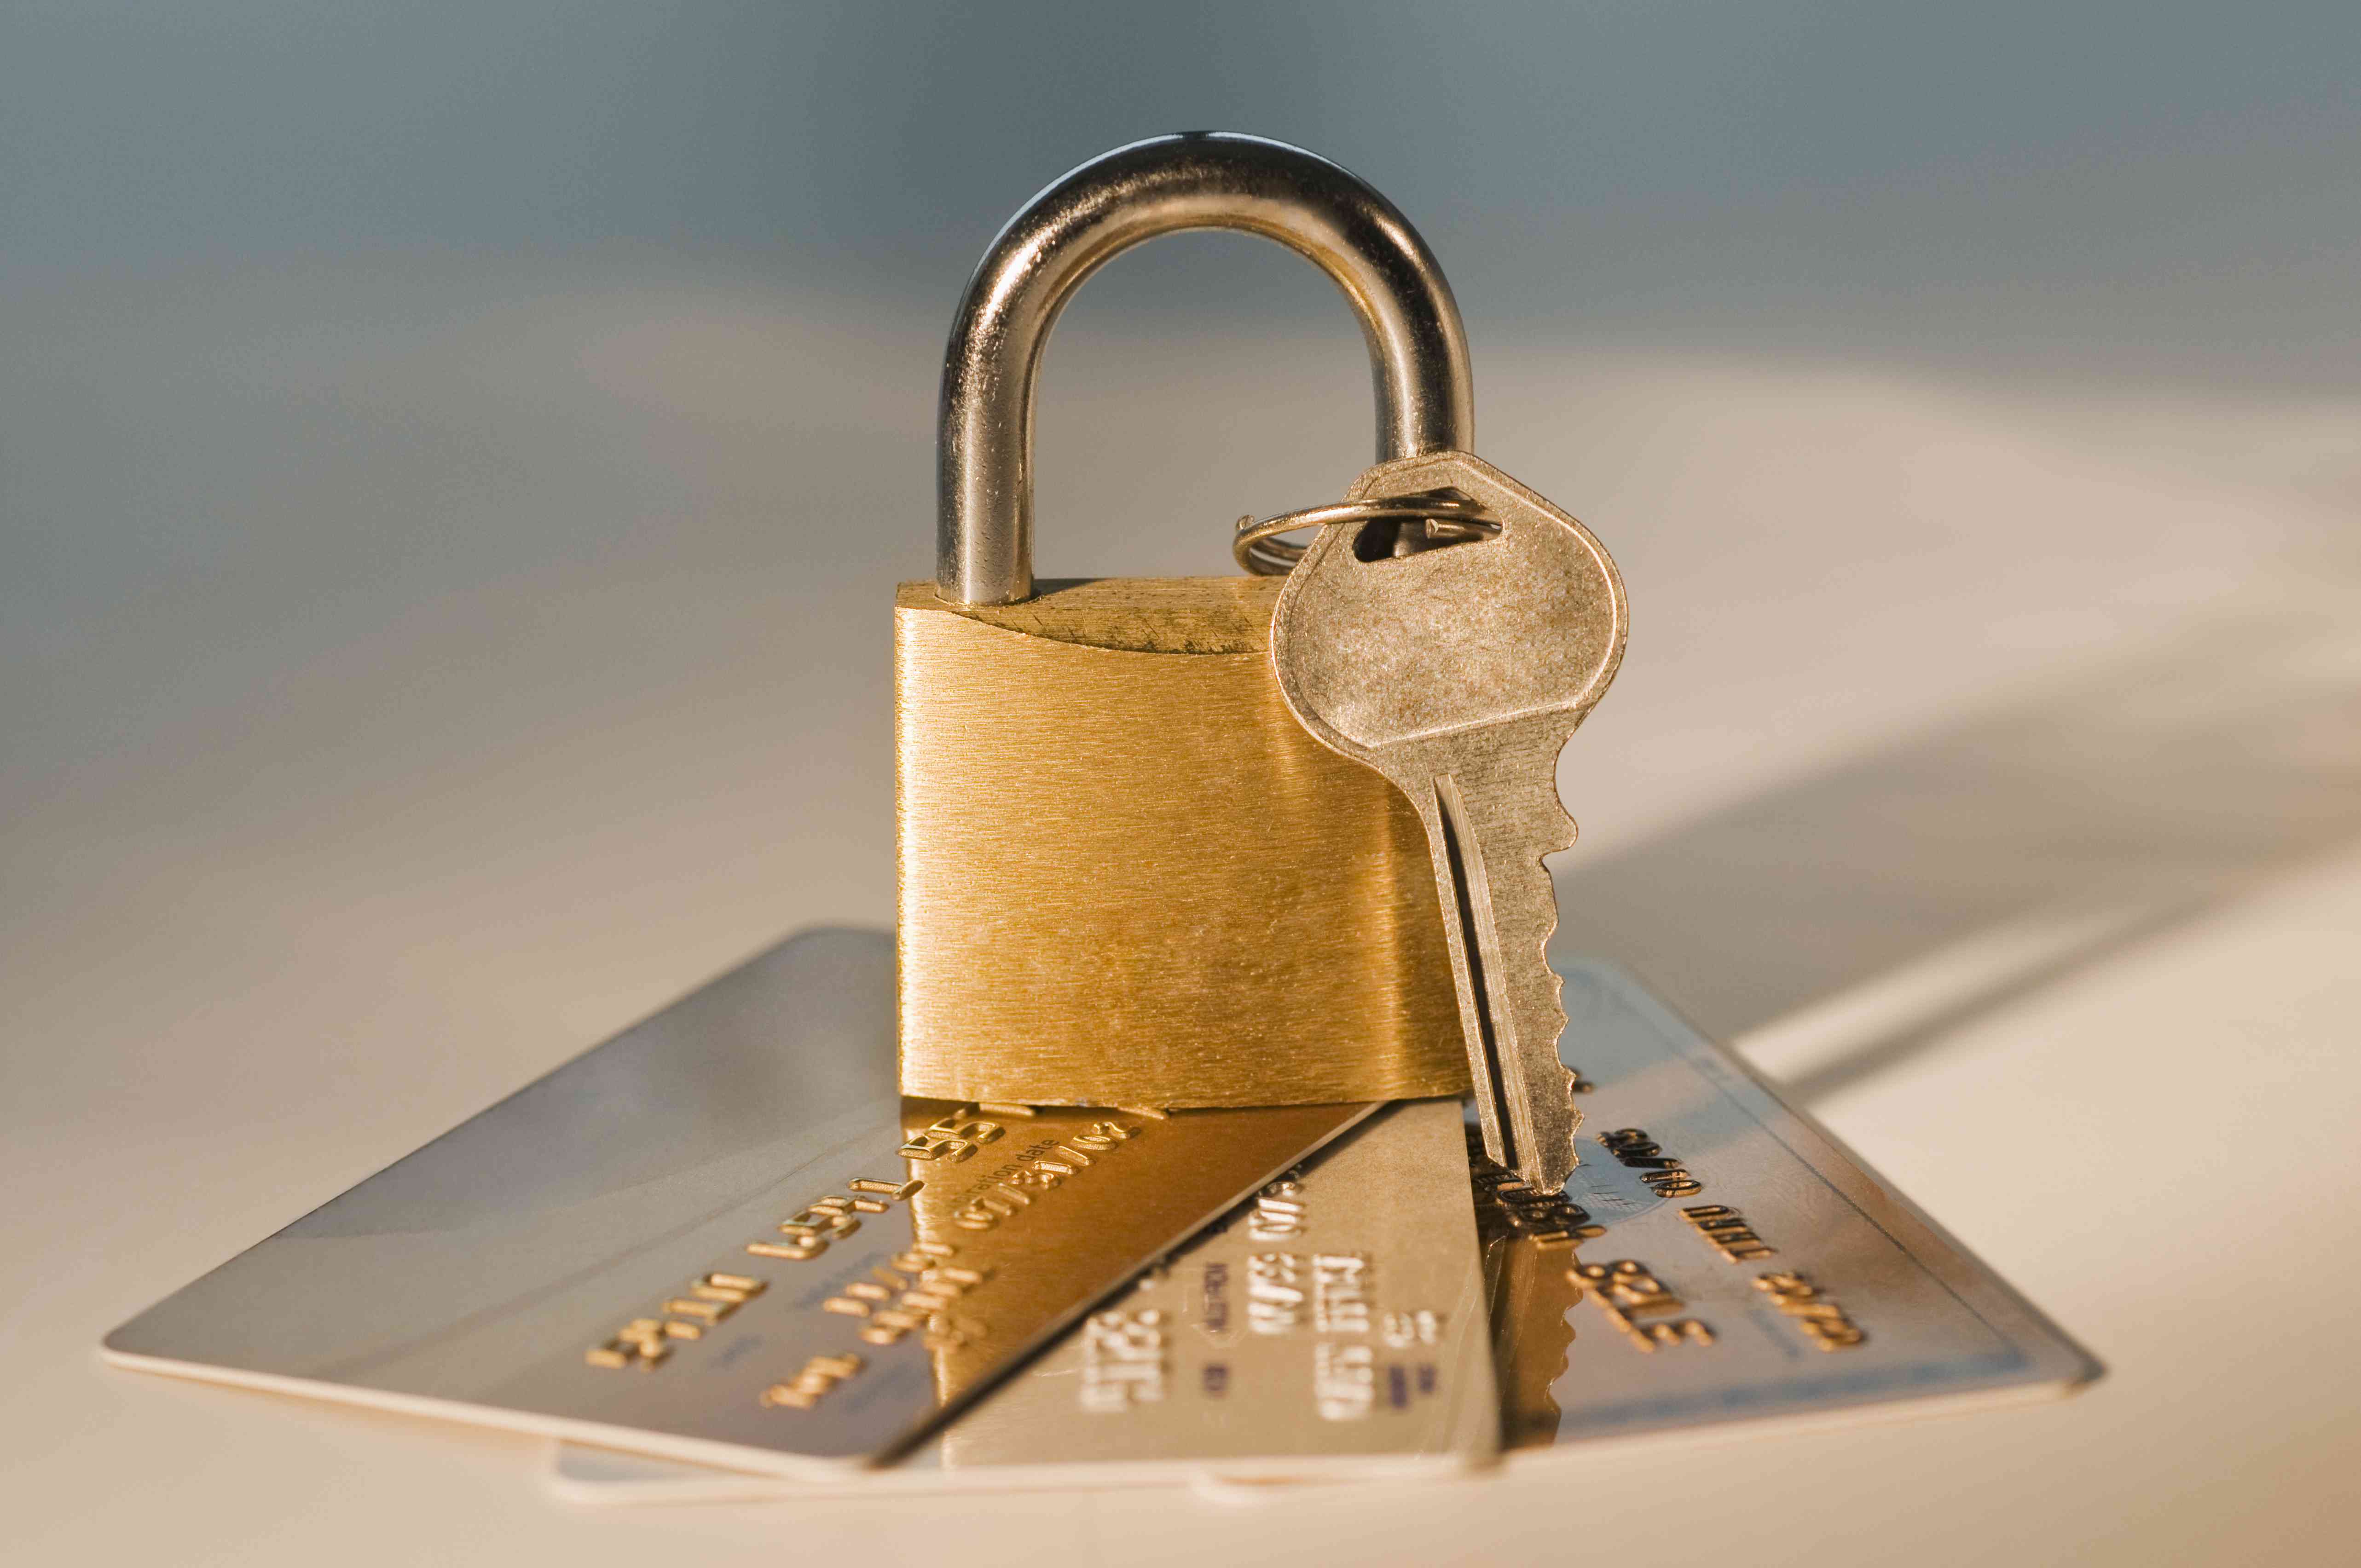 Lock and key on credit cards